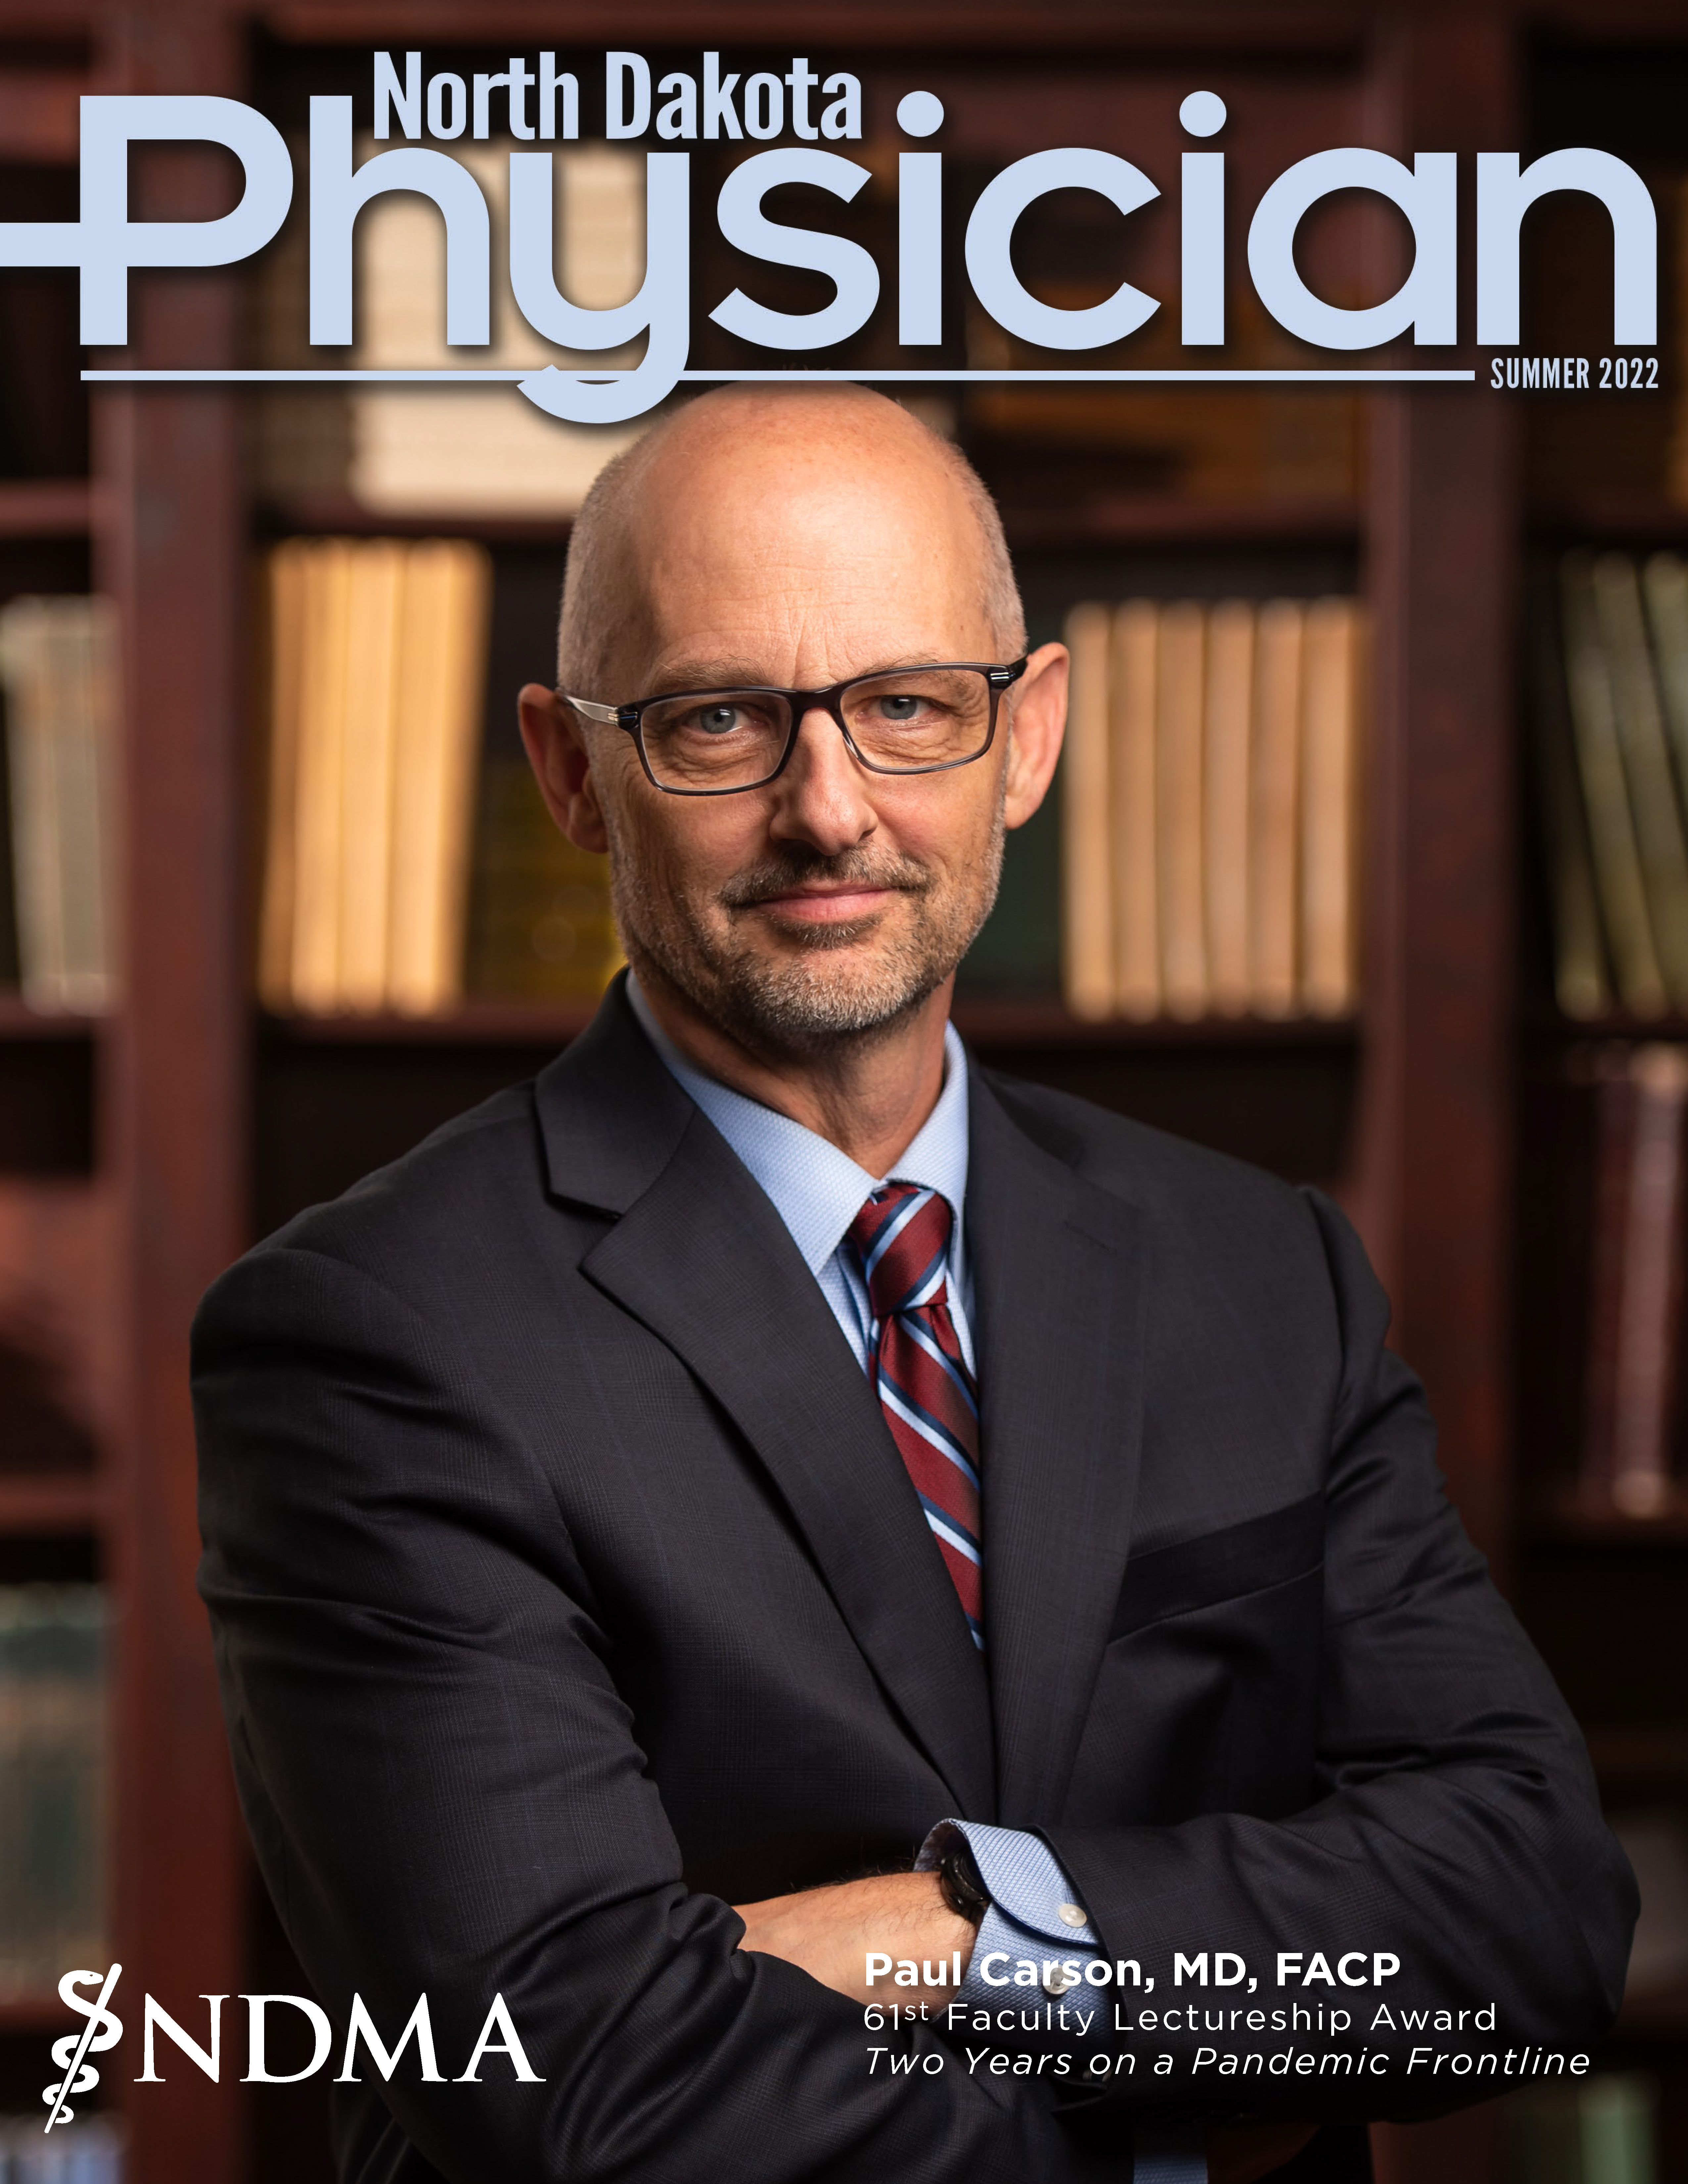 ND Physician Summer 2022 magazine cover